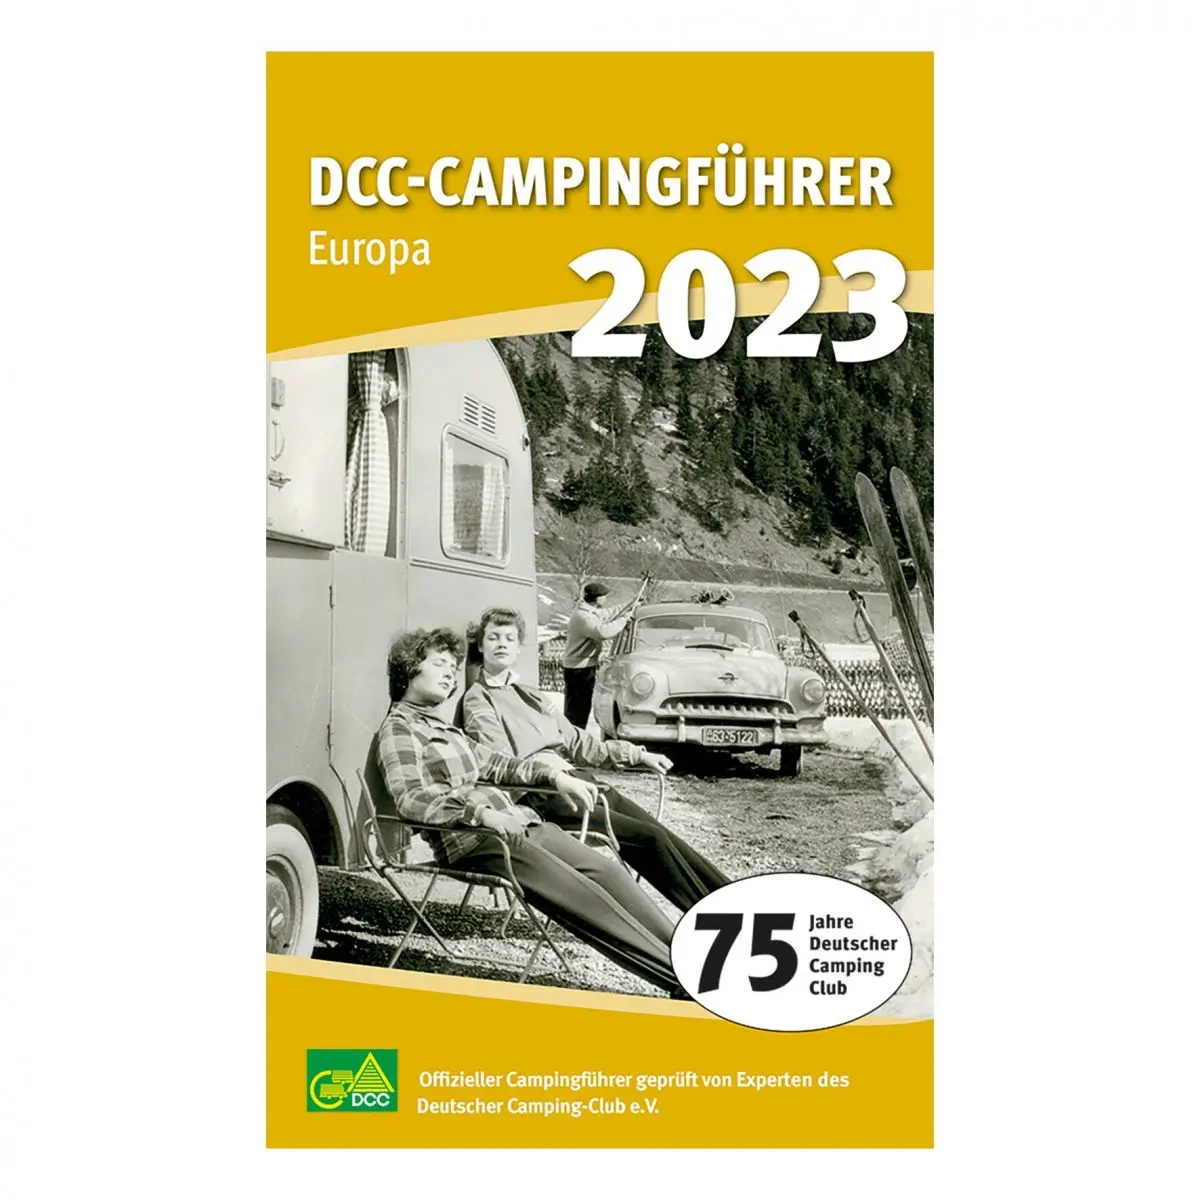 DCC Camping Guide Europe